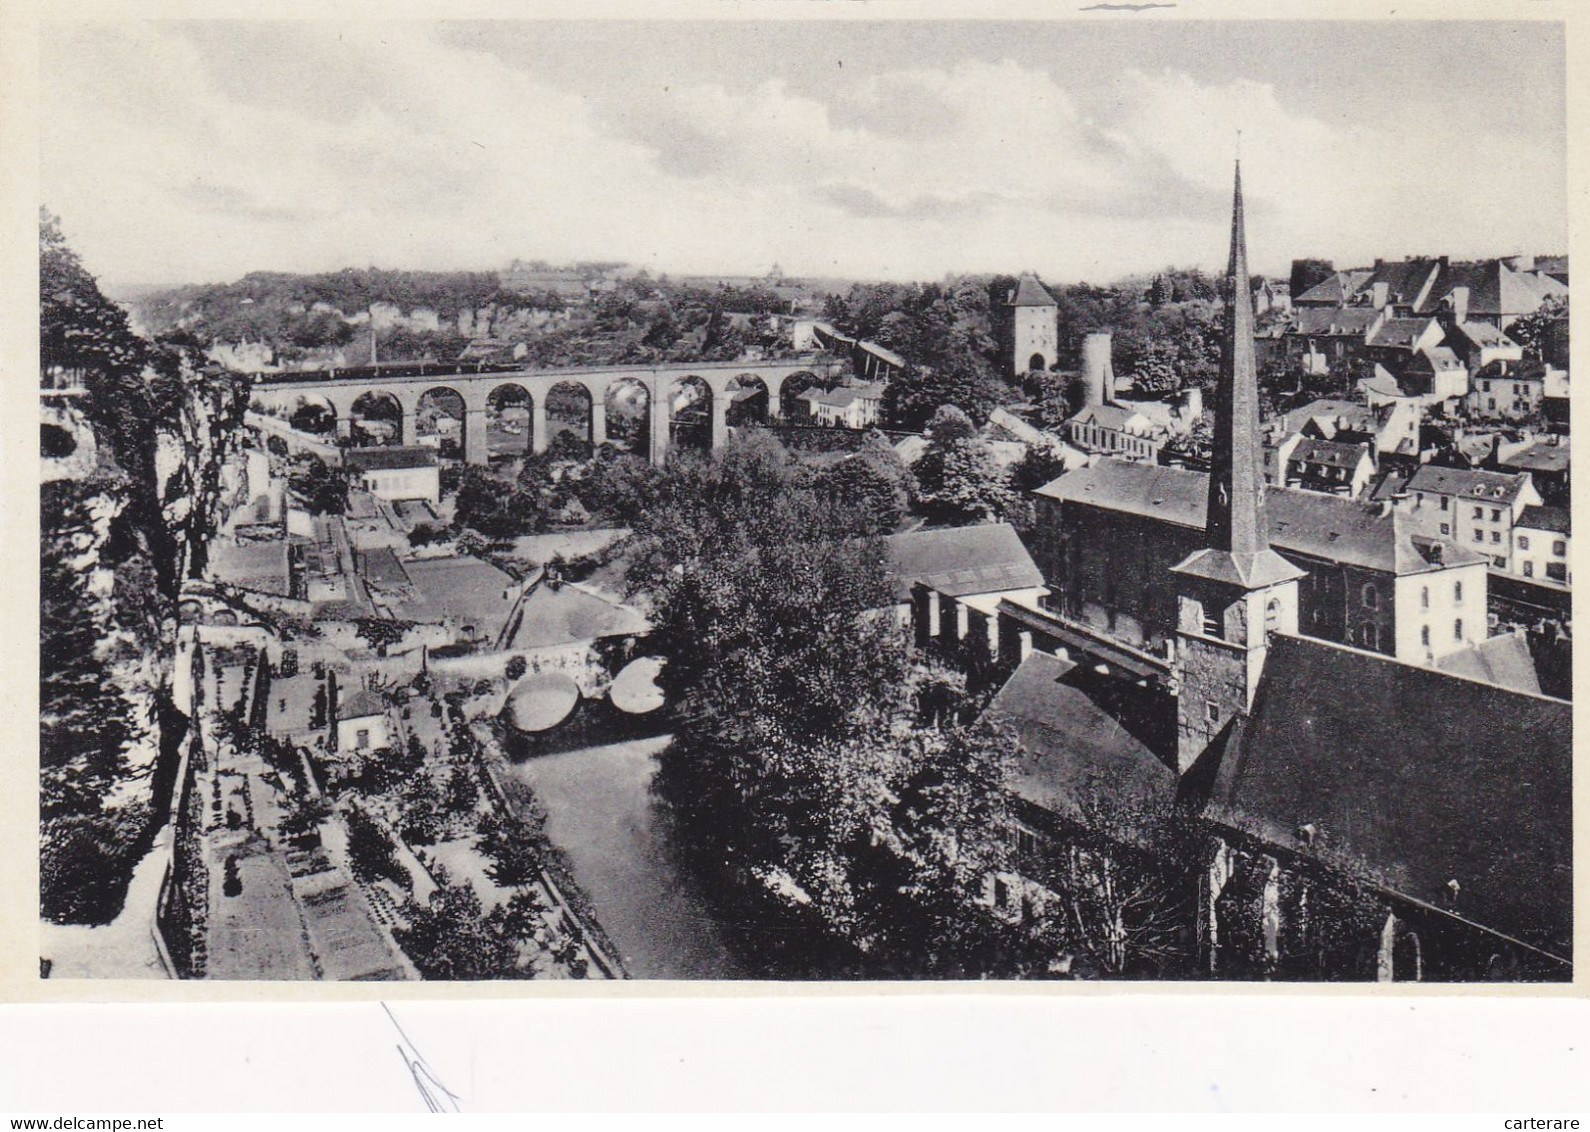 LUXEMBOURG,CARTE POSTALE ANCIENNE - Luxemburg - Stad